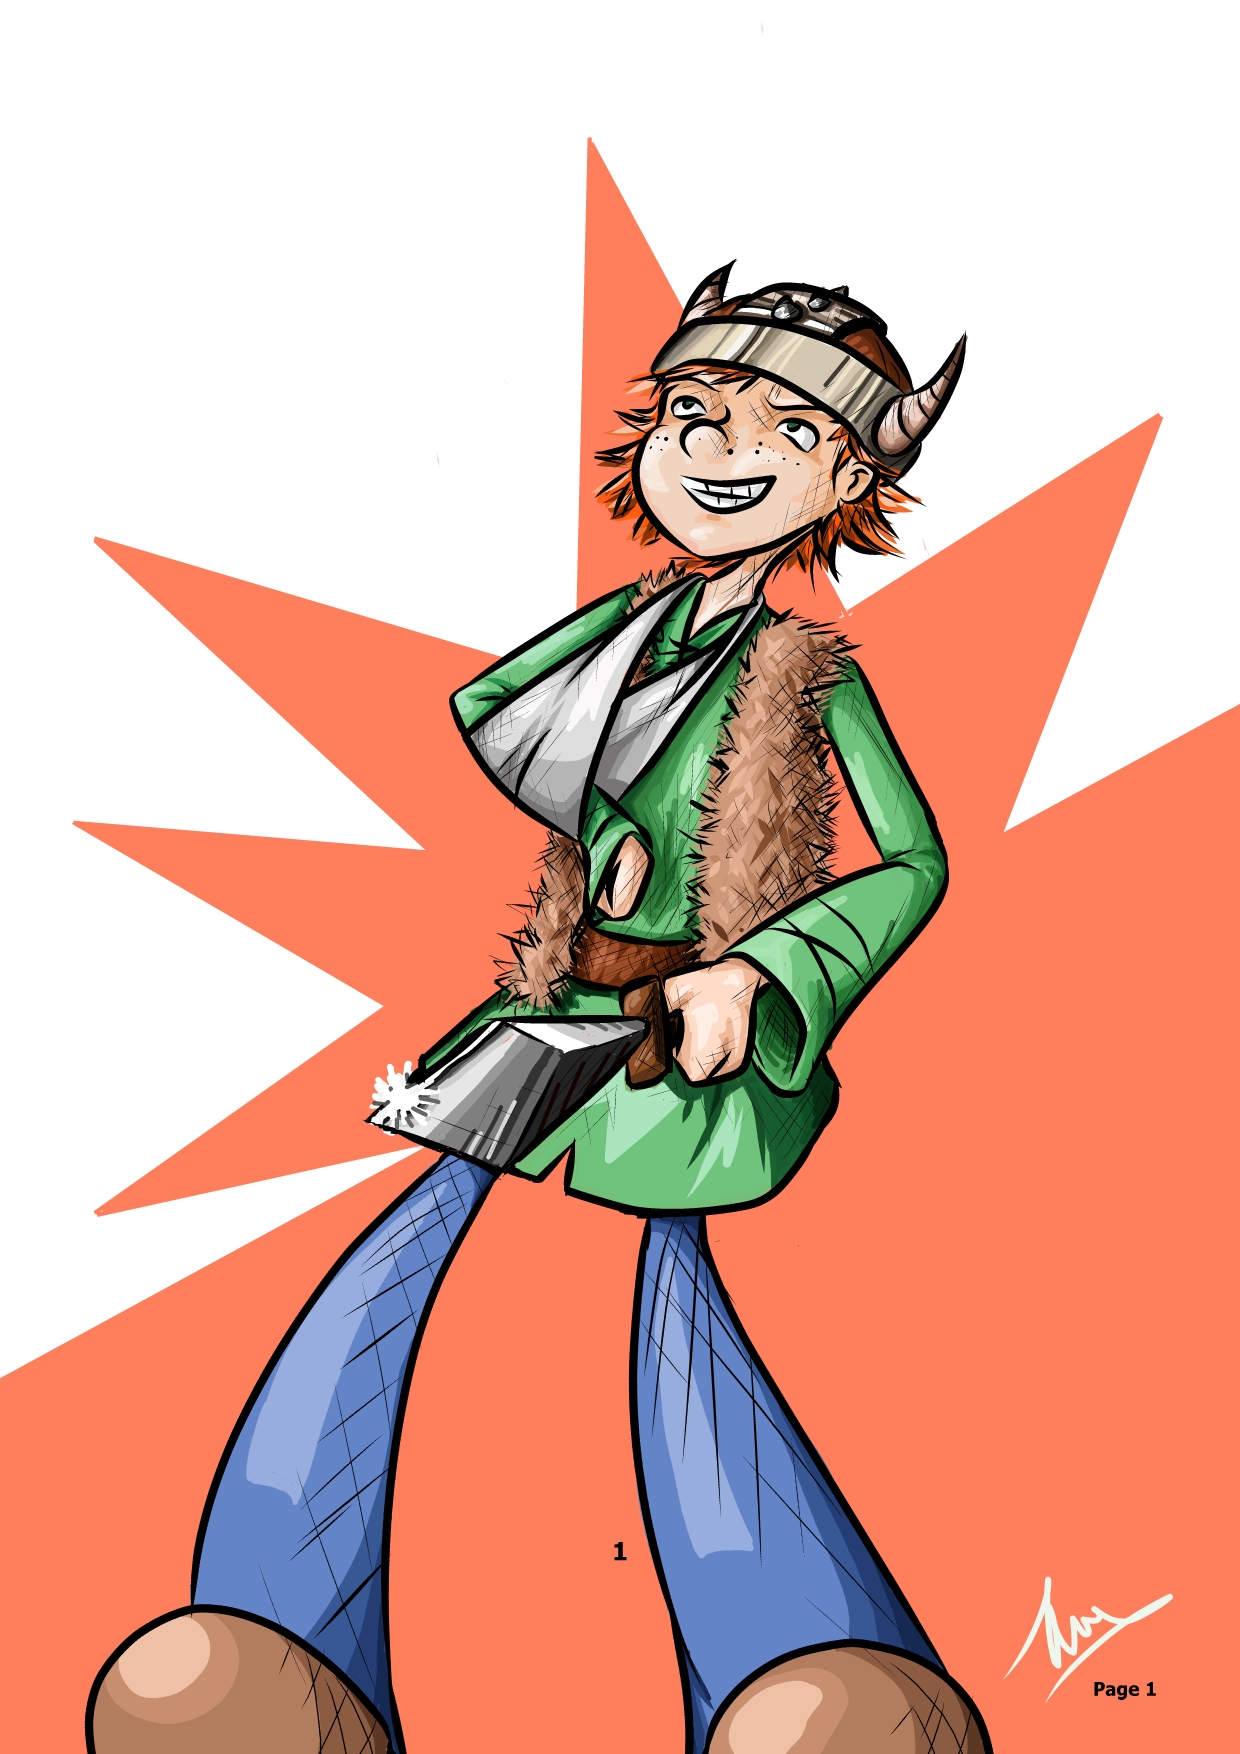 digital art of a boy with a Viking helmet wielding a sword in his left hand with his right arm in a sling